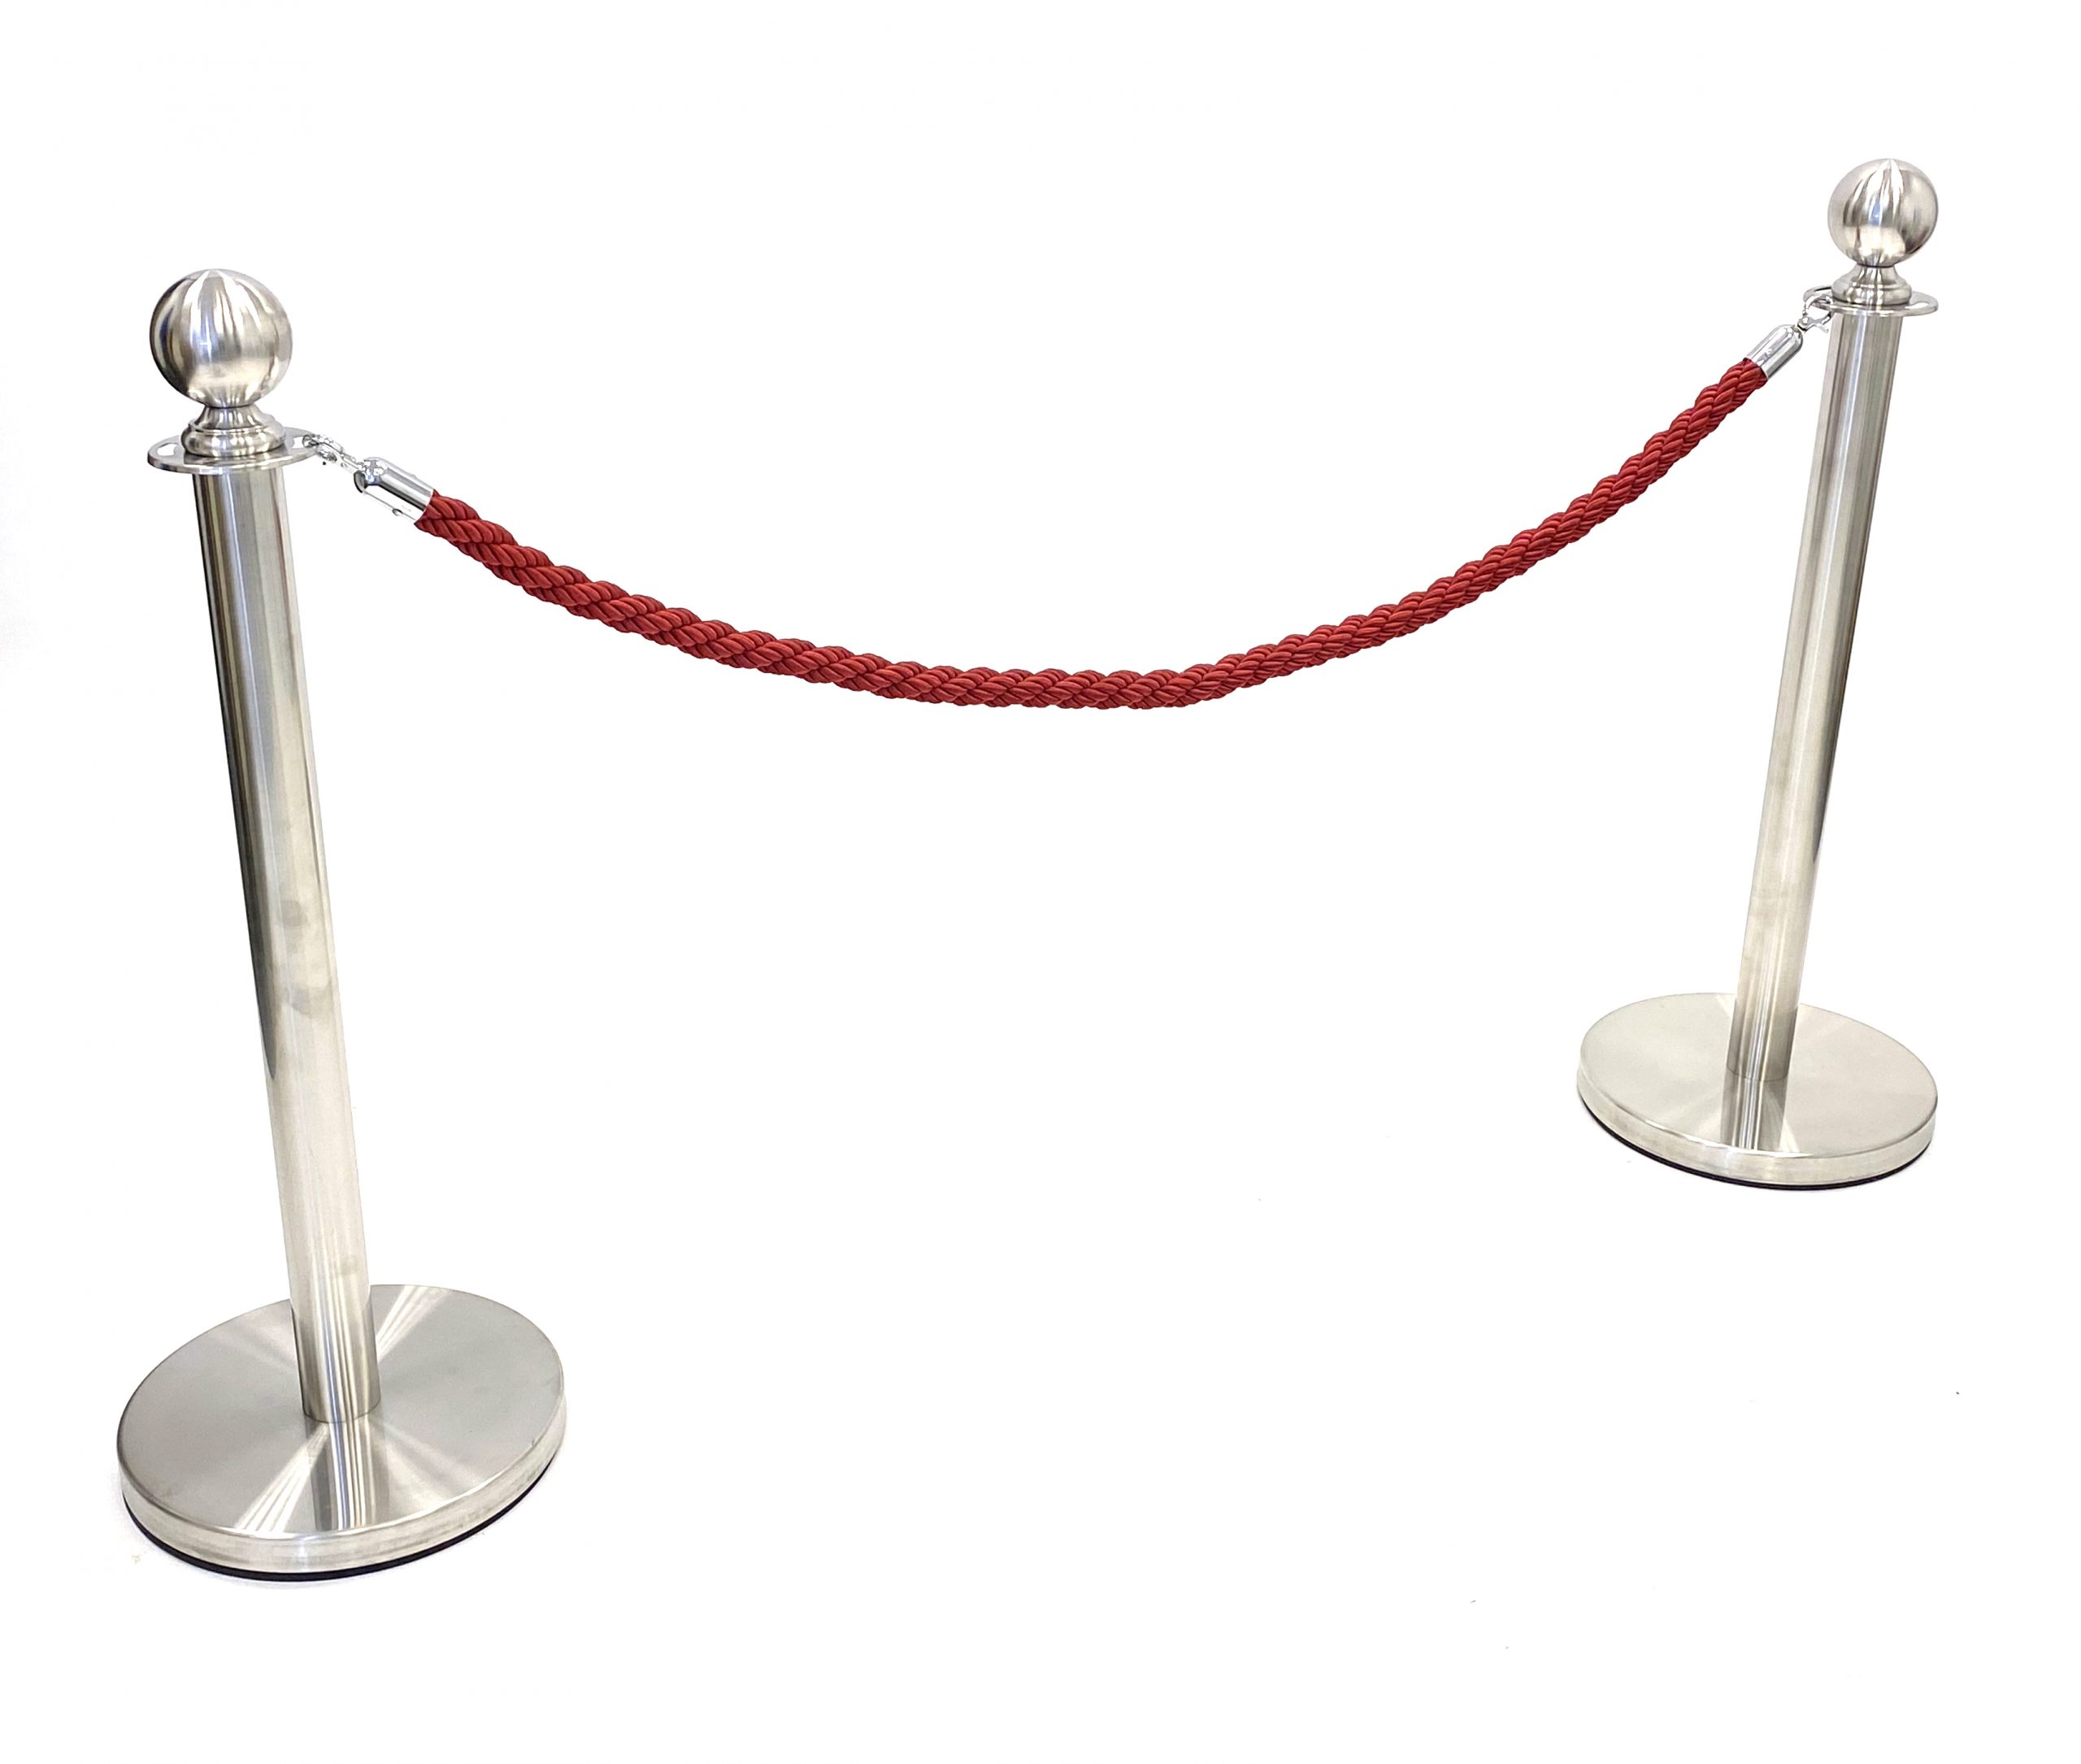 LG-13-D Silver Metal Posts Barrier Posts Post and Ropes Crowd Control Posts 